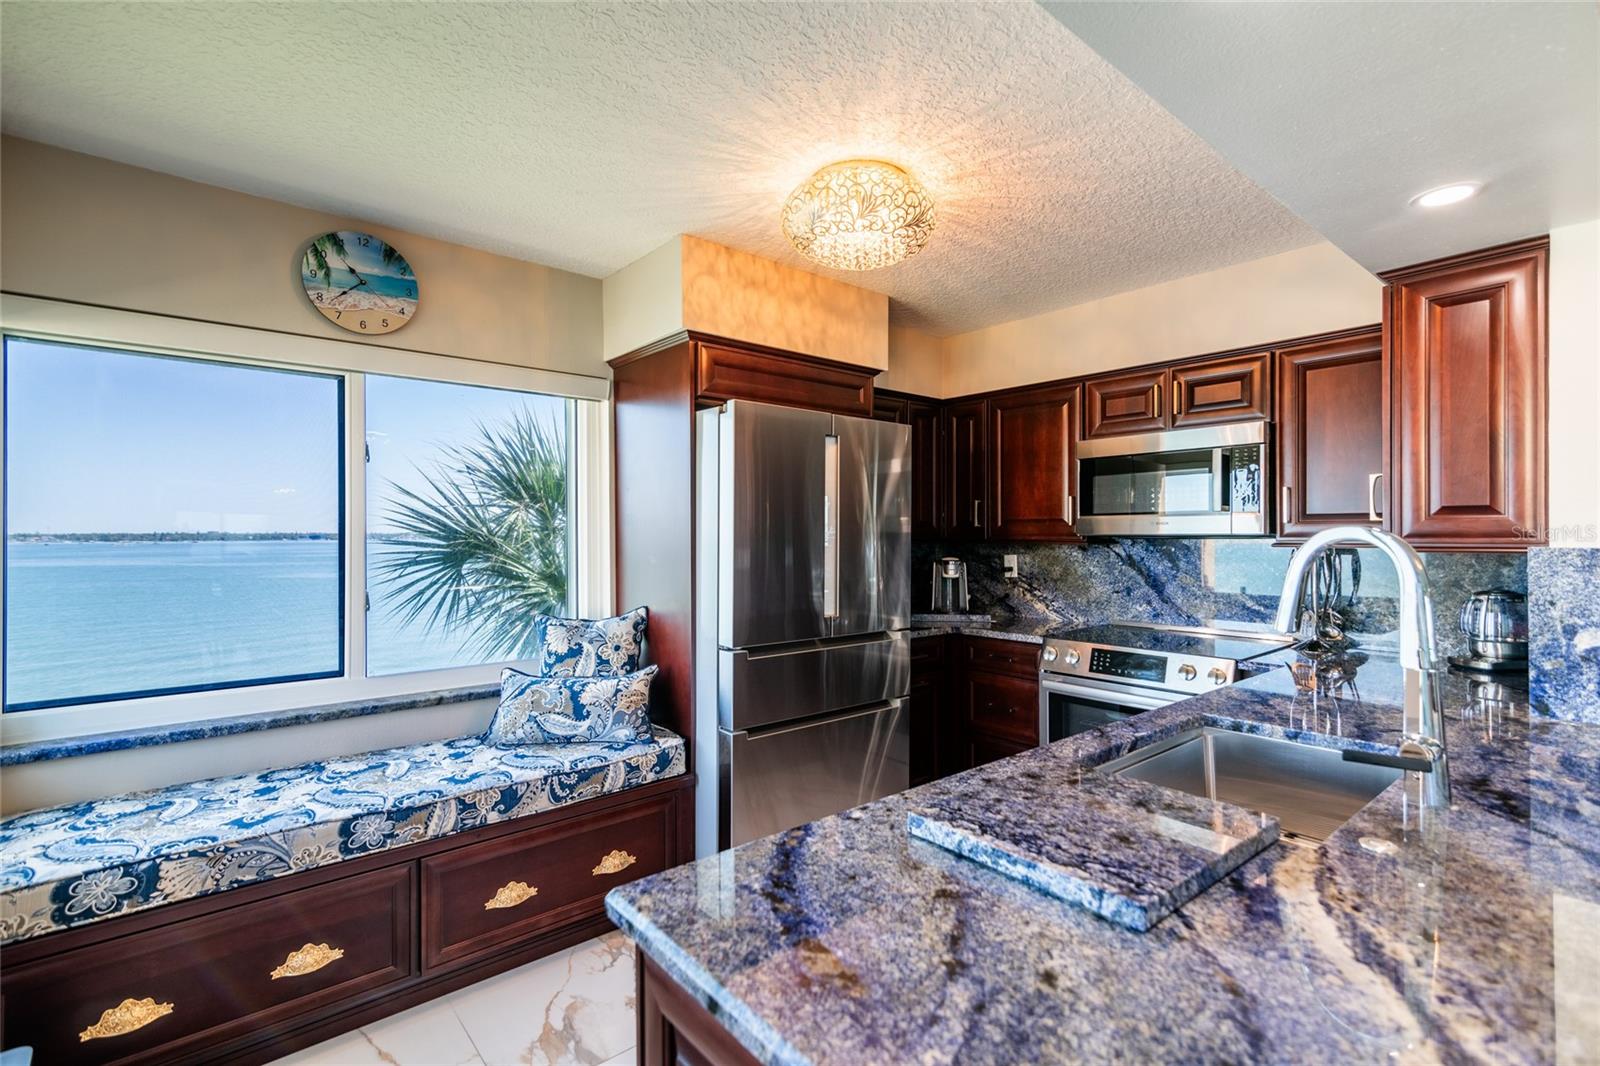 Kitchen with custom window seat perfect for your morning coffee while enjoying the view.